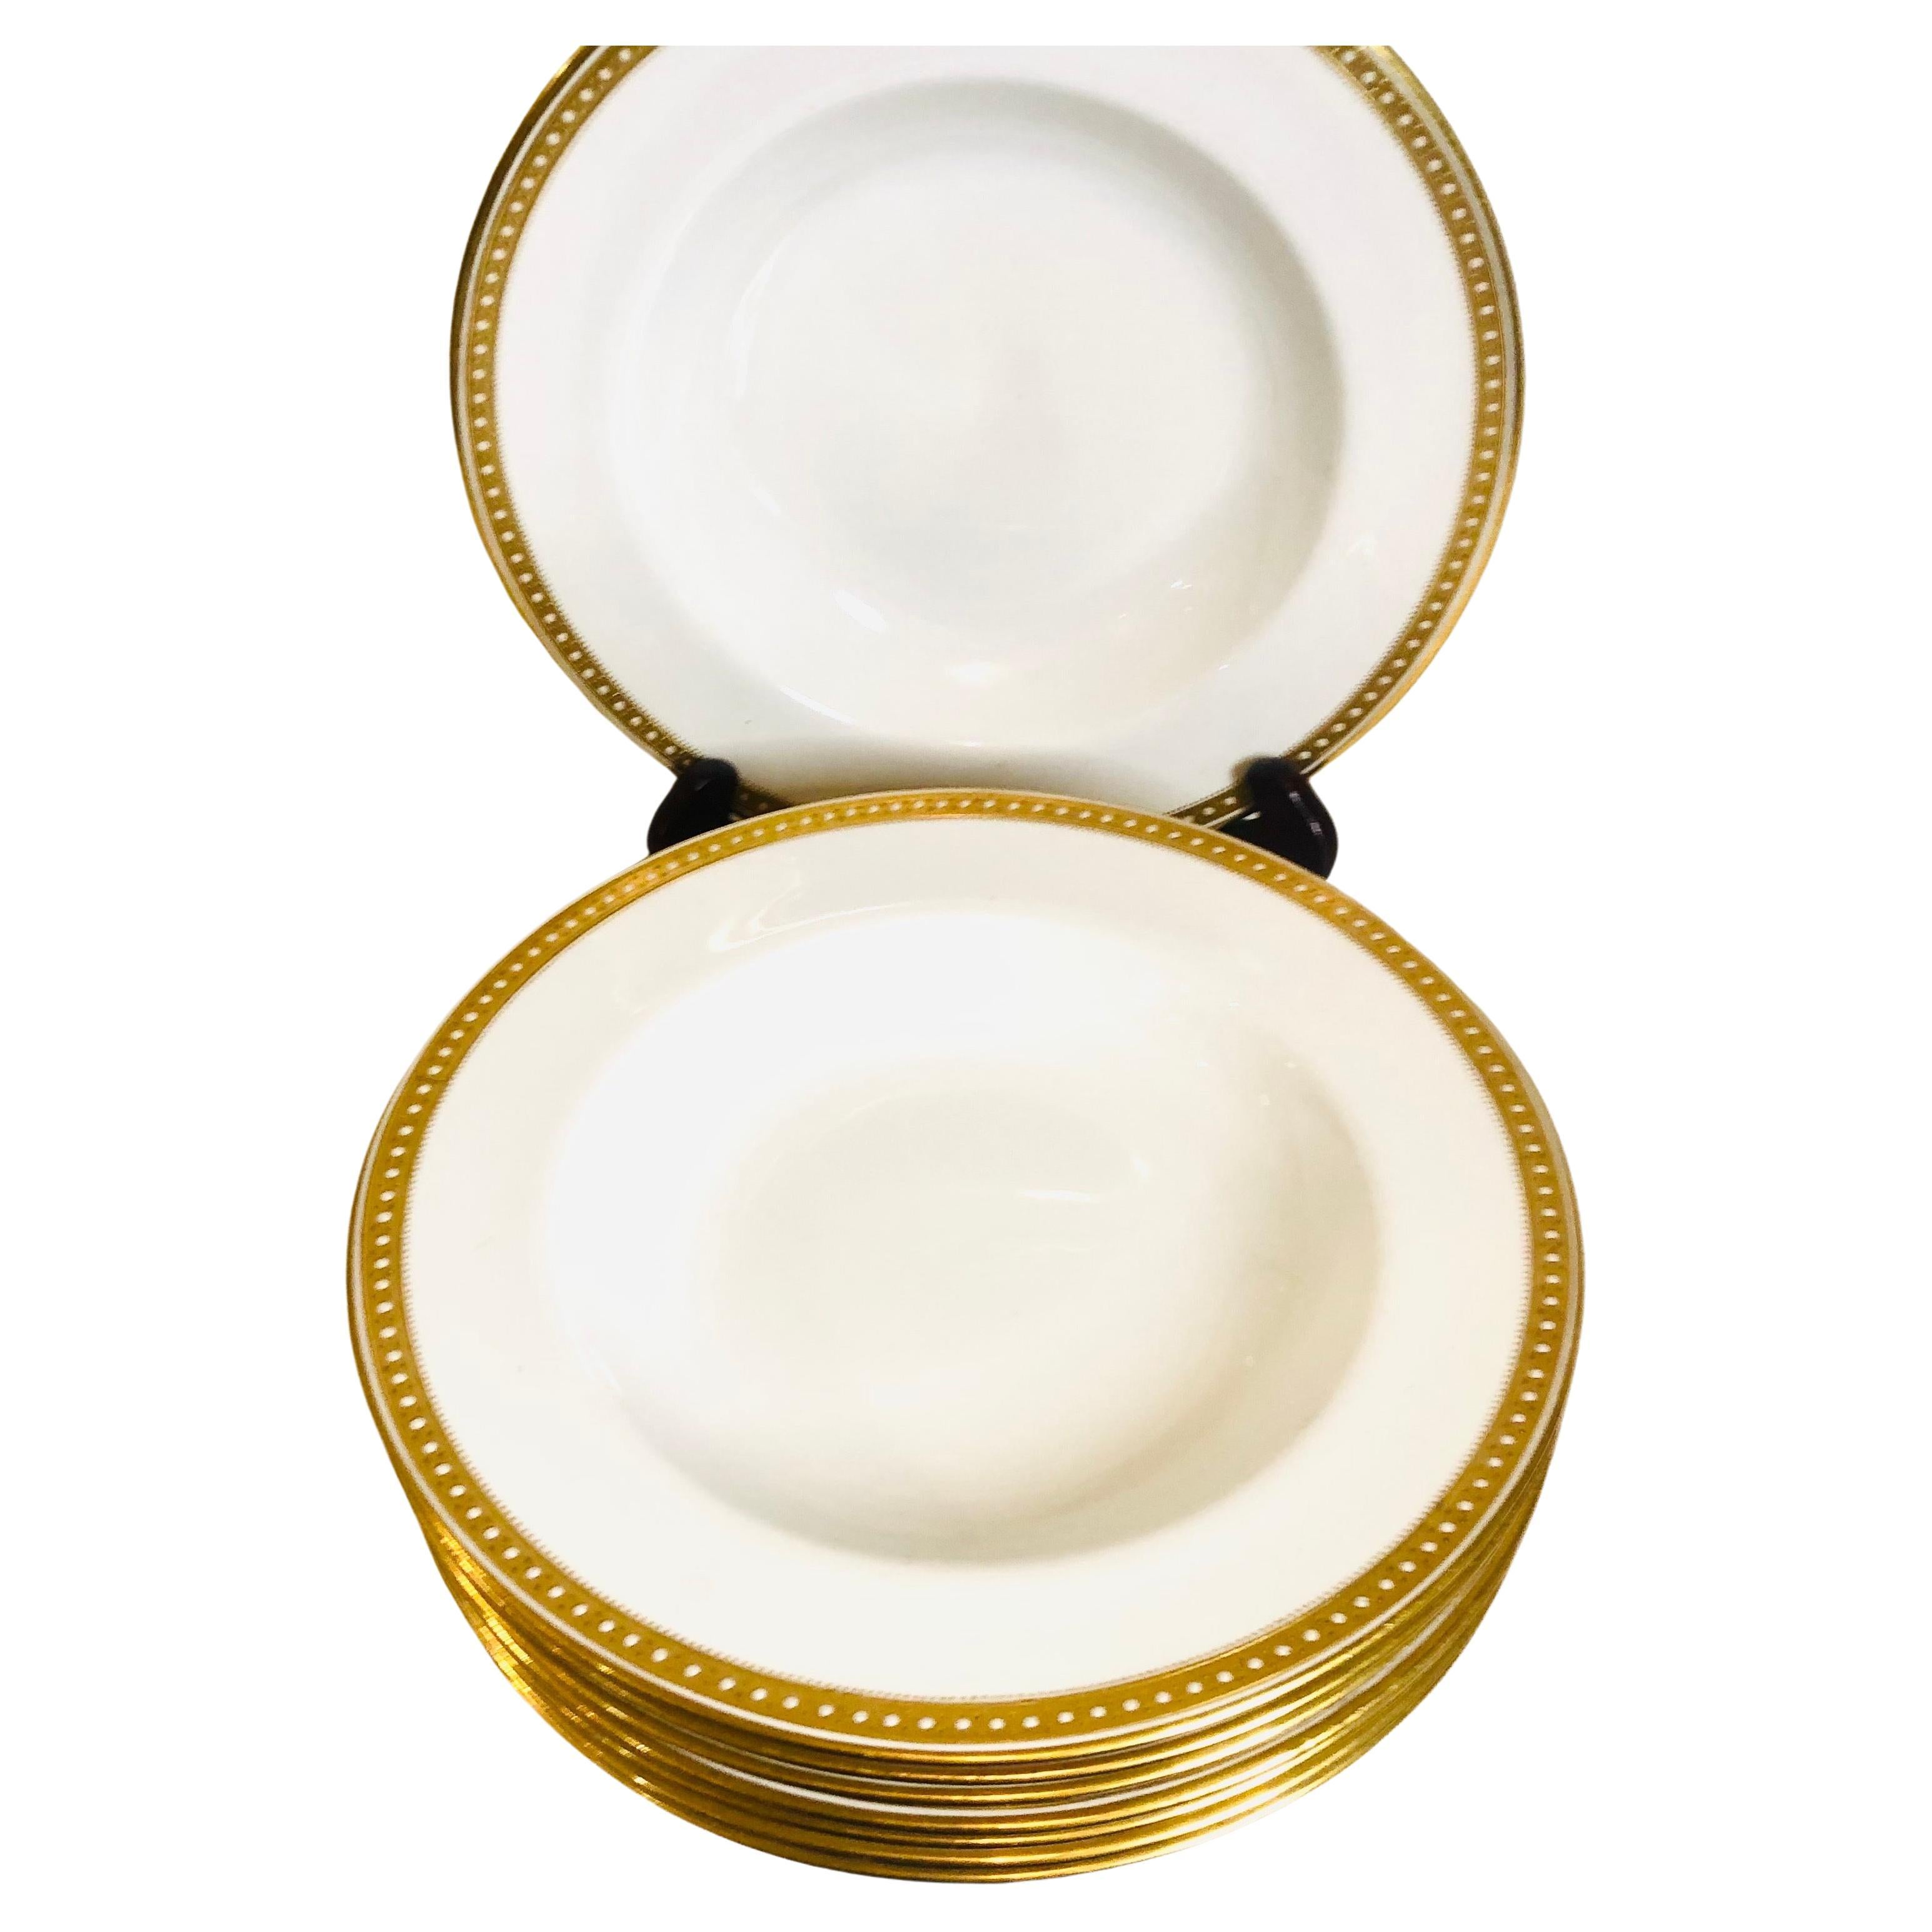 English 16 Copeland Spode Wide Rim Soups Made for T. Goode with Gold Border & Jeweling